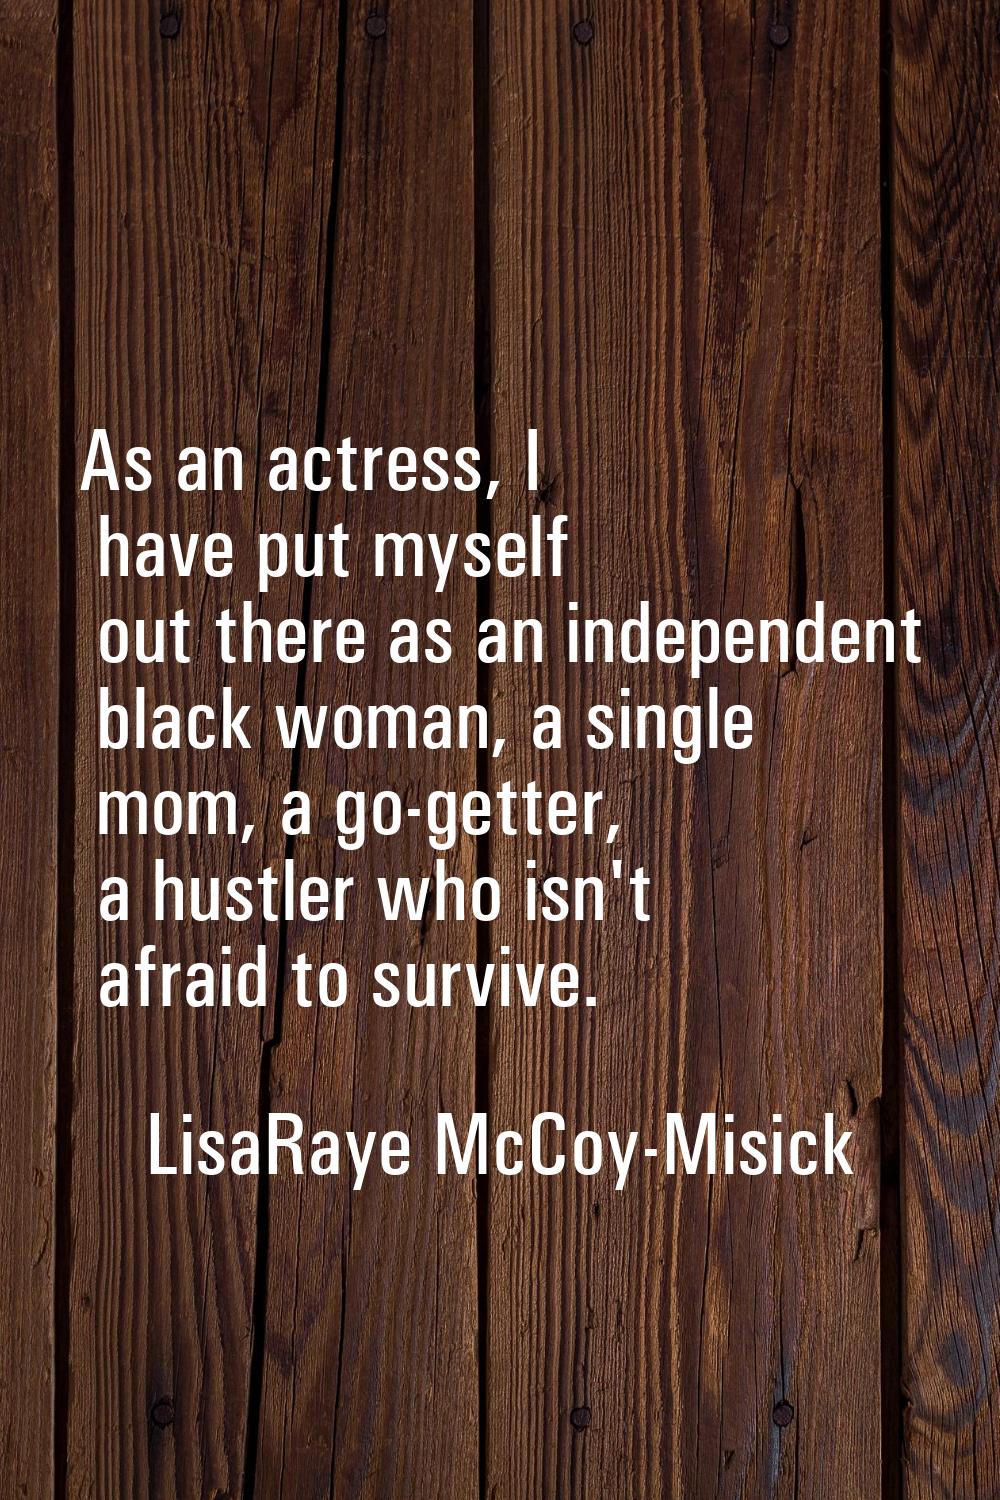 As an actress, I have put myself out there as an independent black woman, a single mom, a go-getter